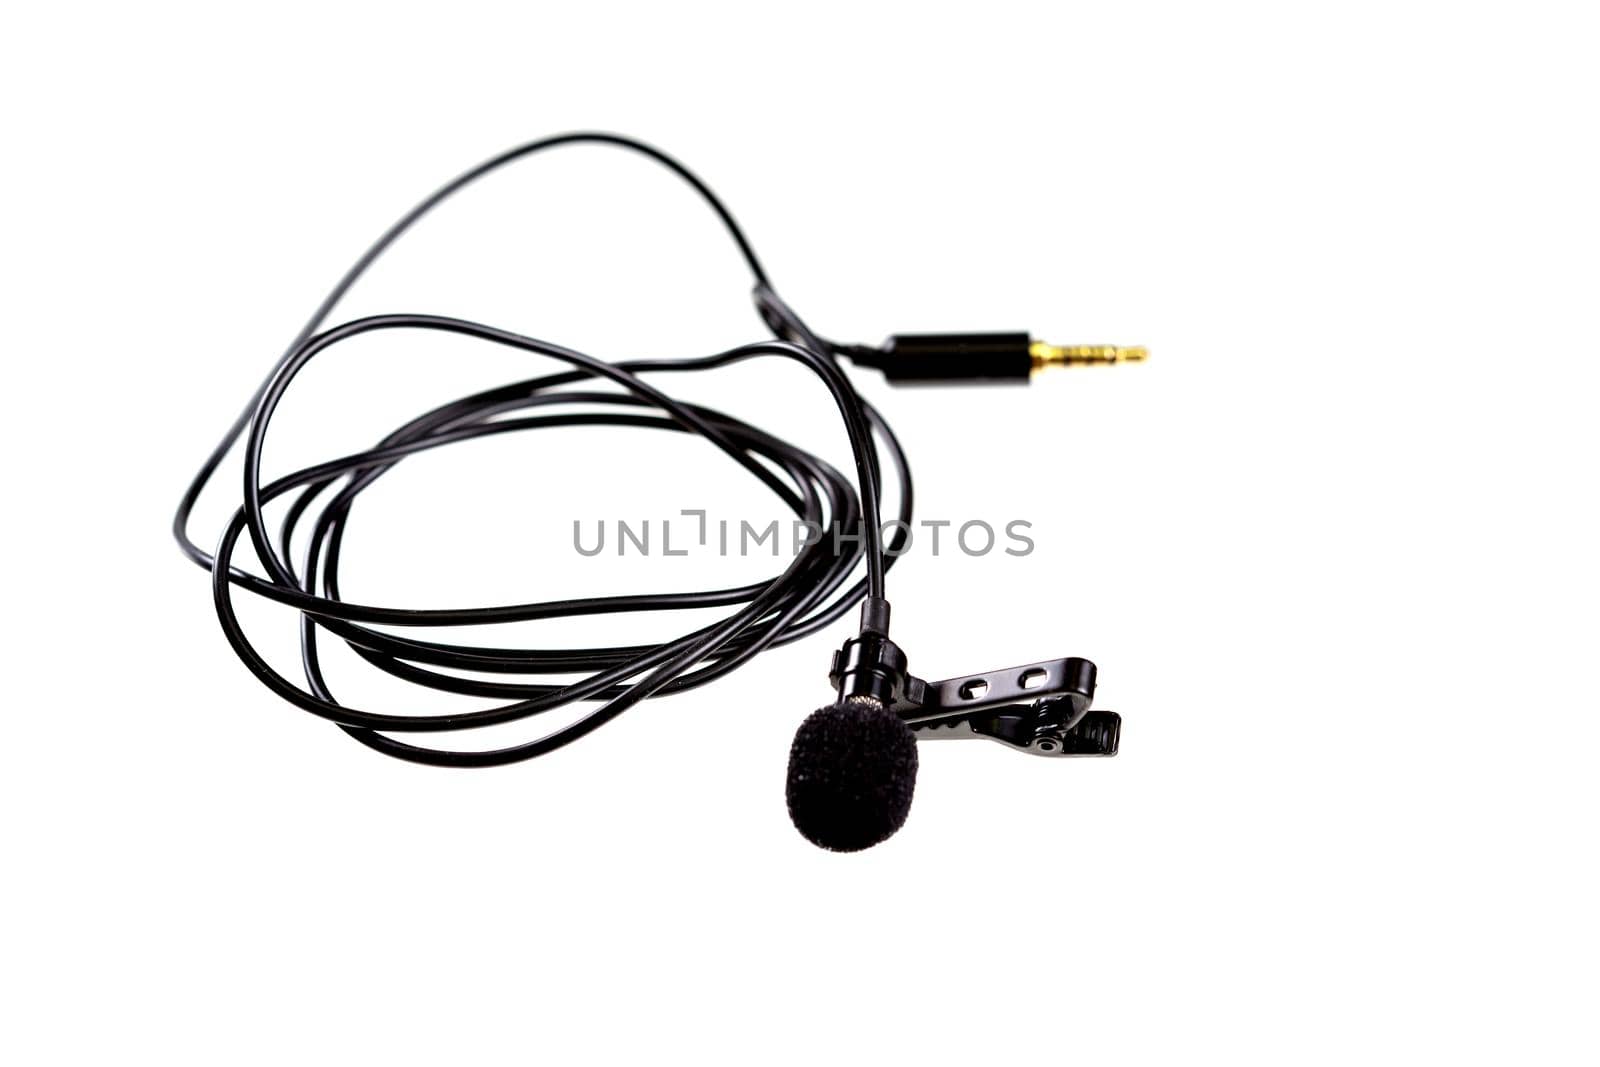 Small lavalier microphone or lapel mic with clip on white background. by galinasharapova